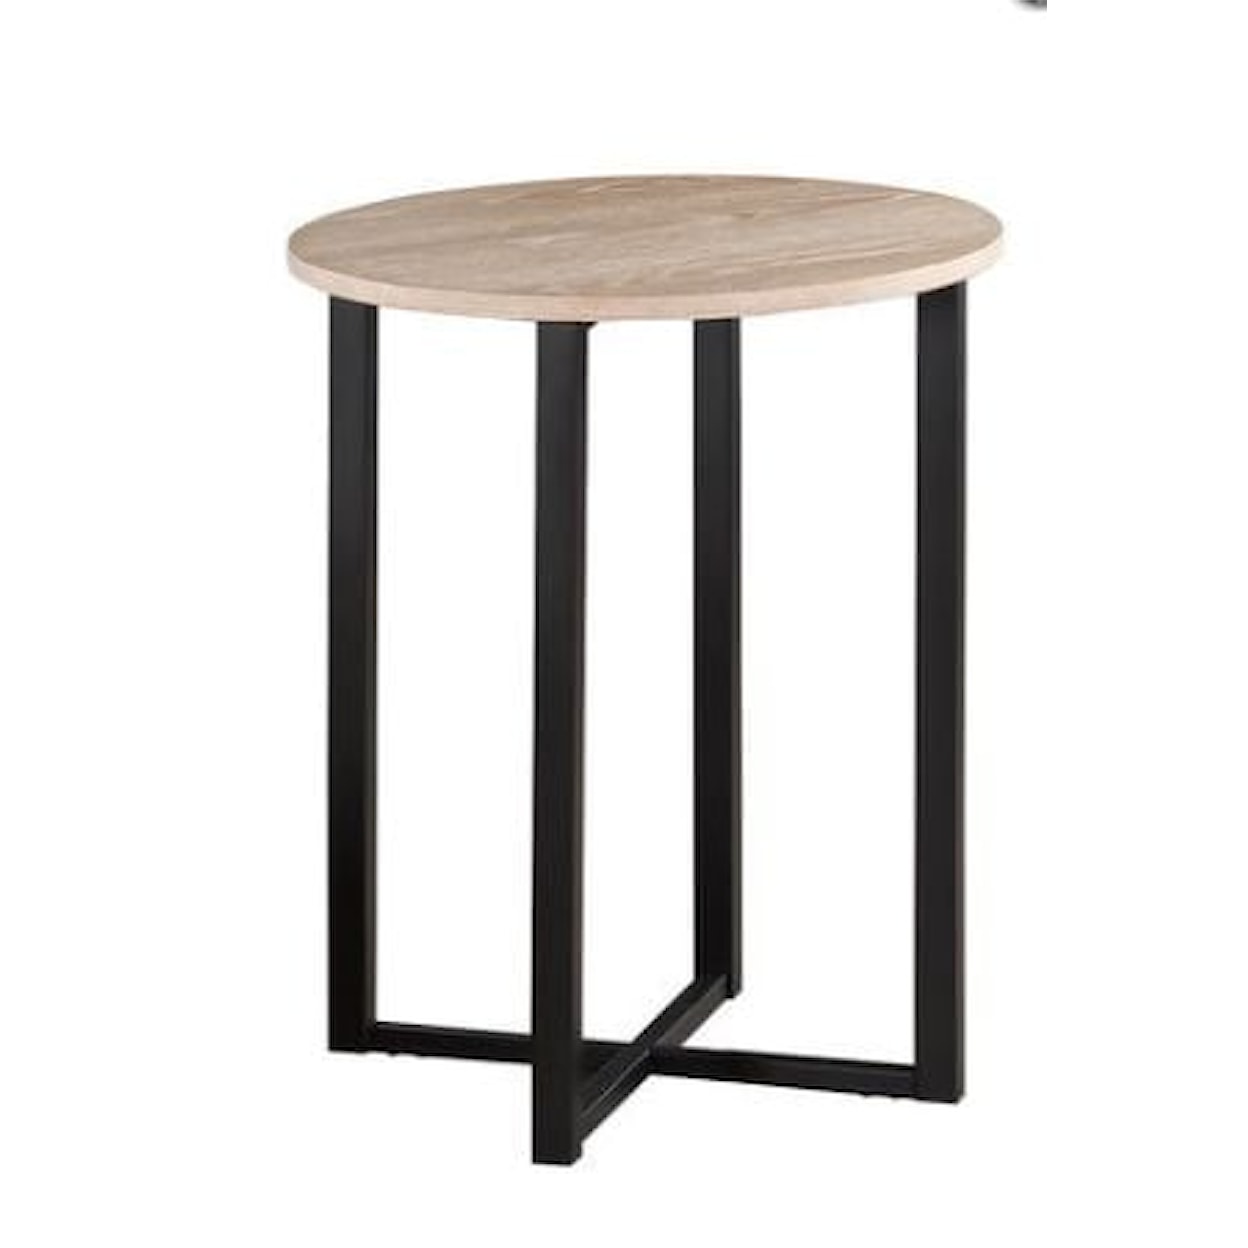 Donald Choi Canada Gilmore Nesting Coffee Table